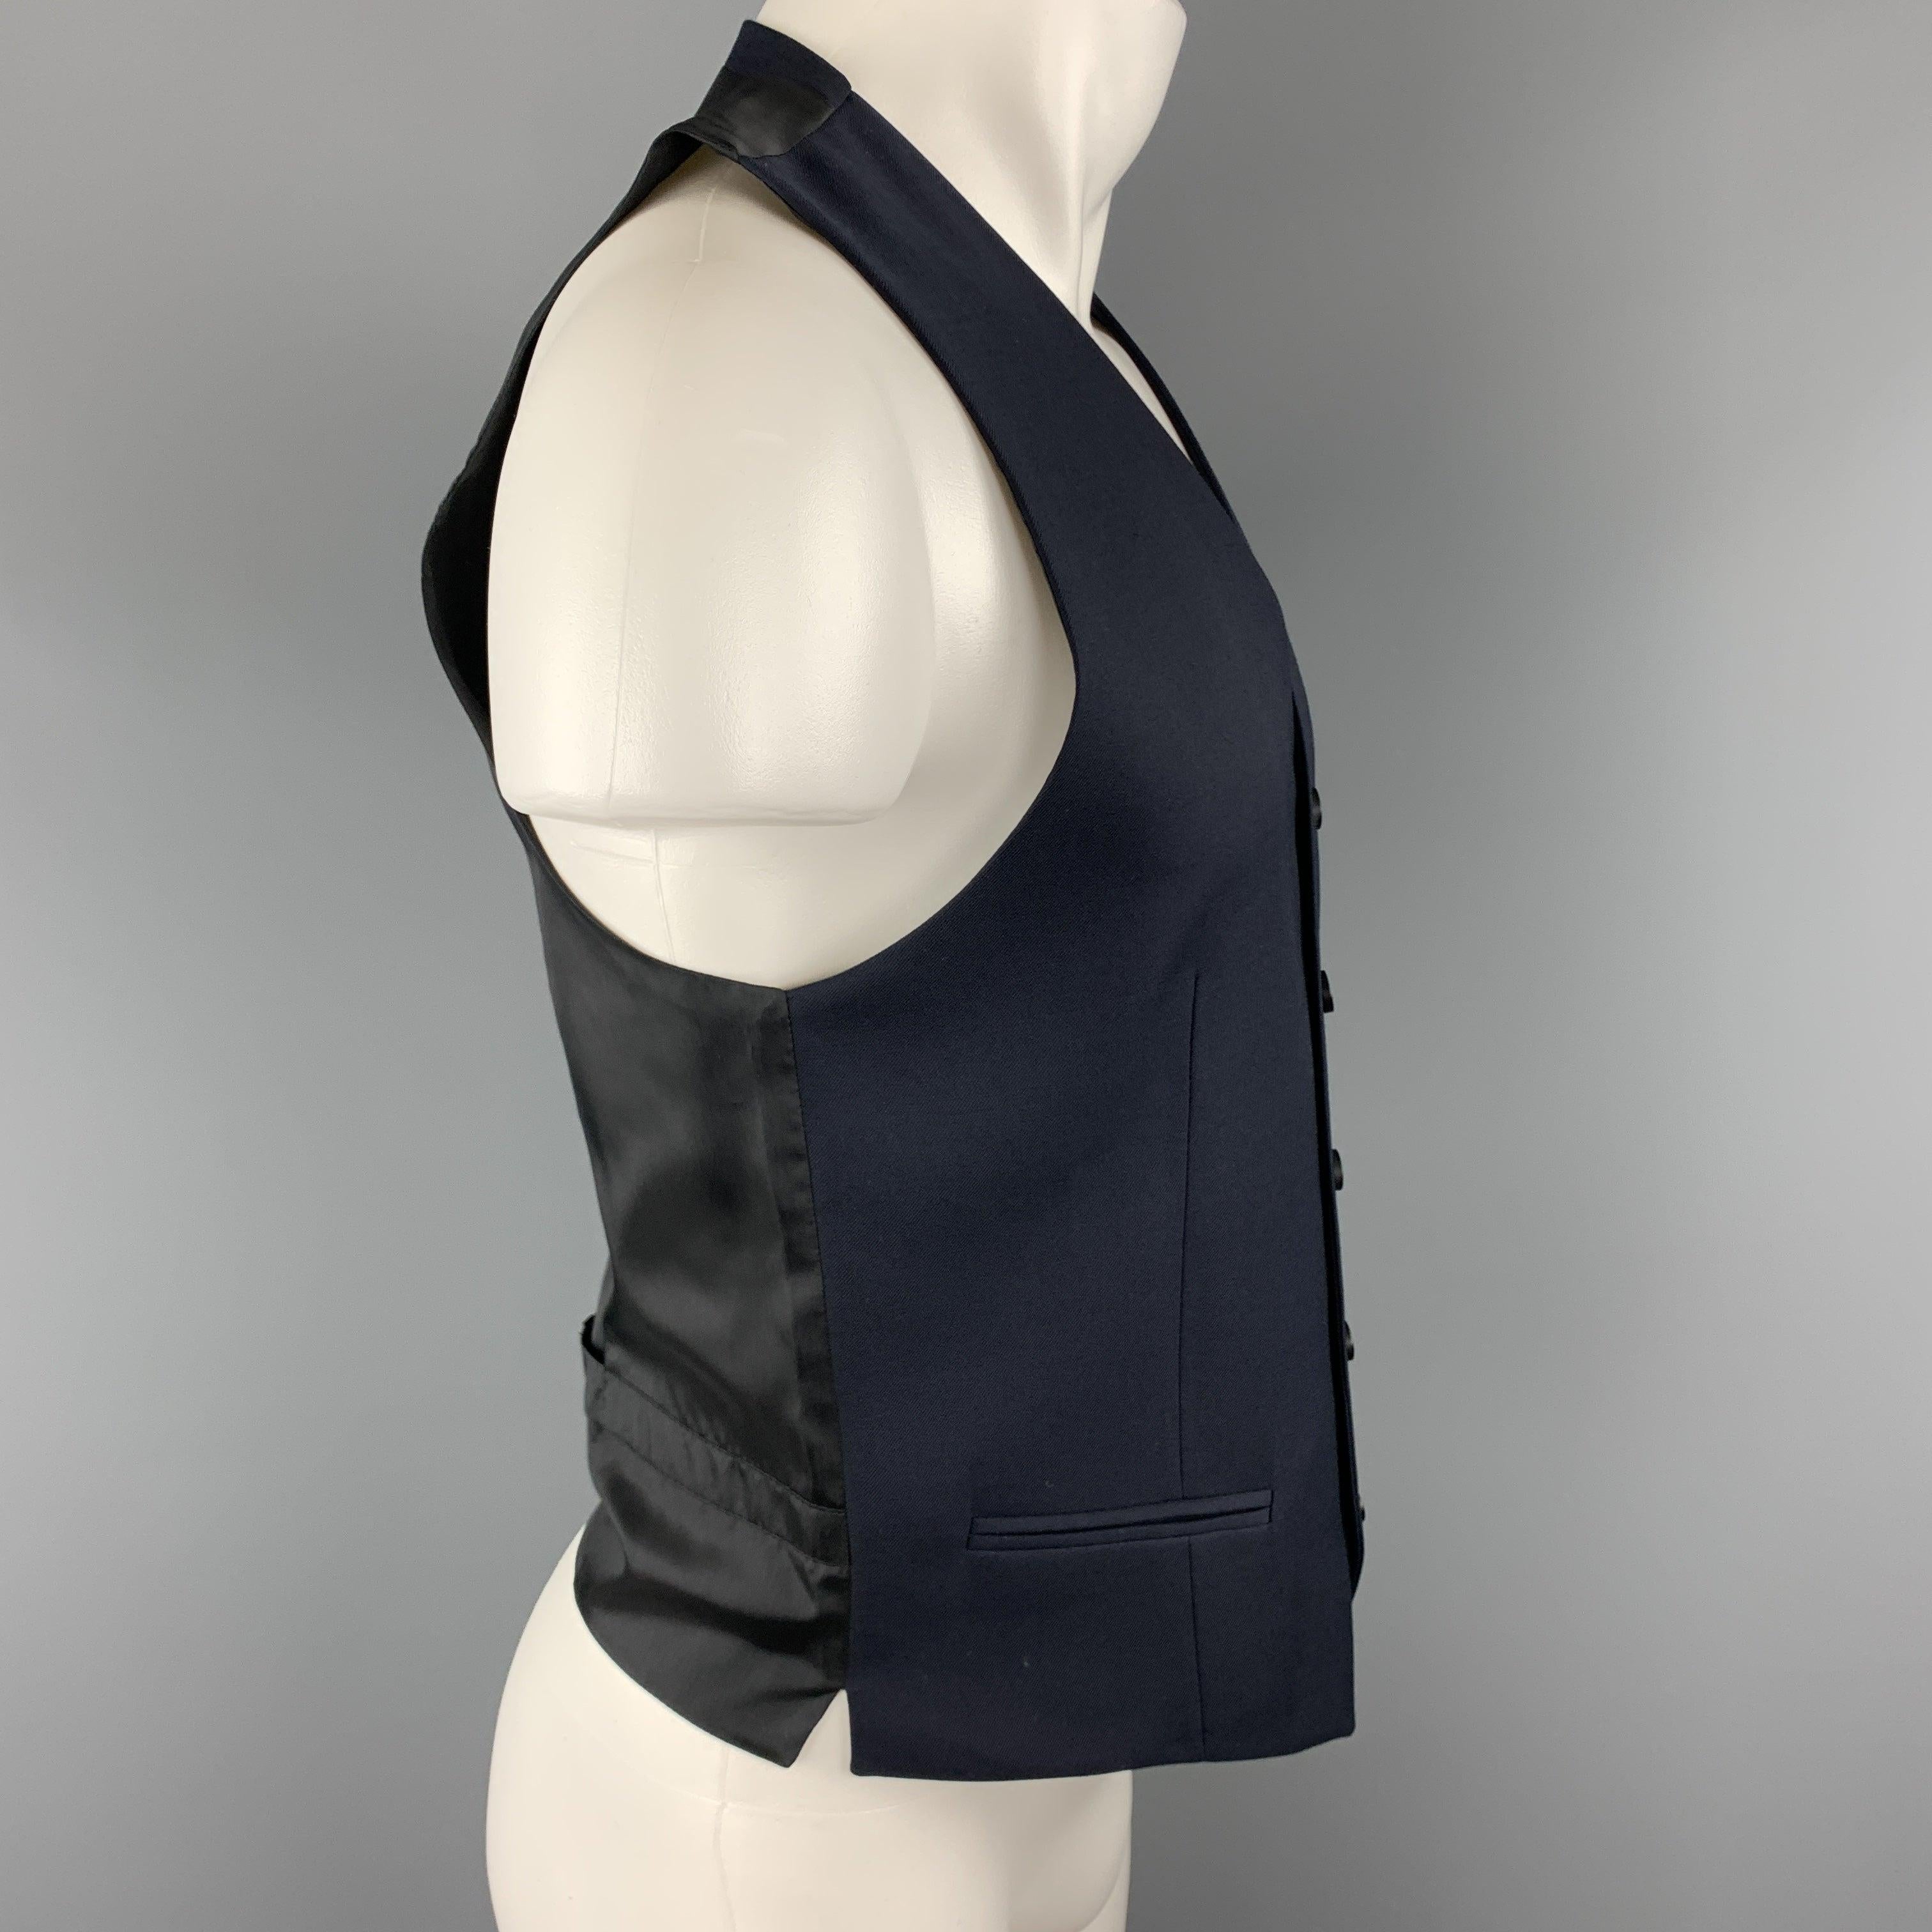 THE KOOPLES Size 36 Navy & Black Wool Buttoned Vest In Excellent Condition For Sale In San Francisco, CA